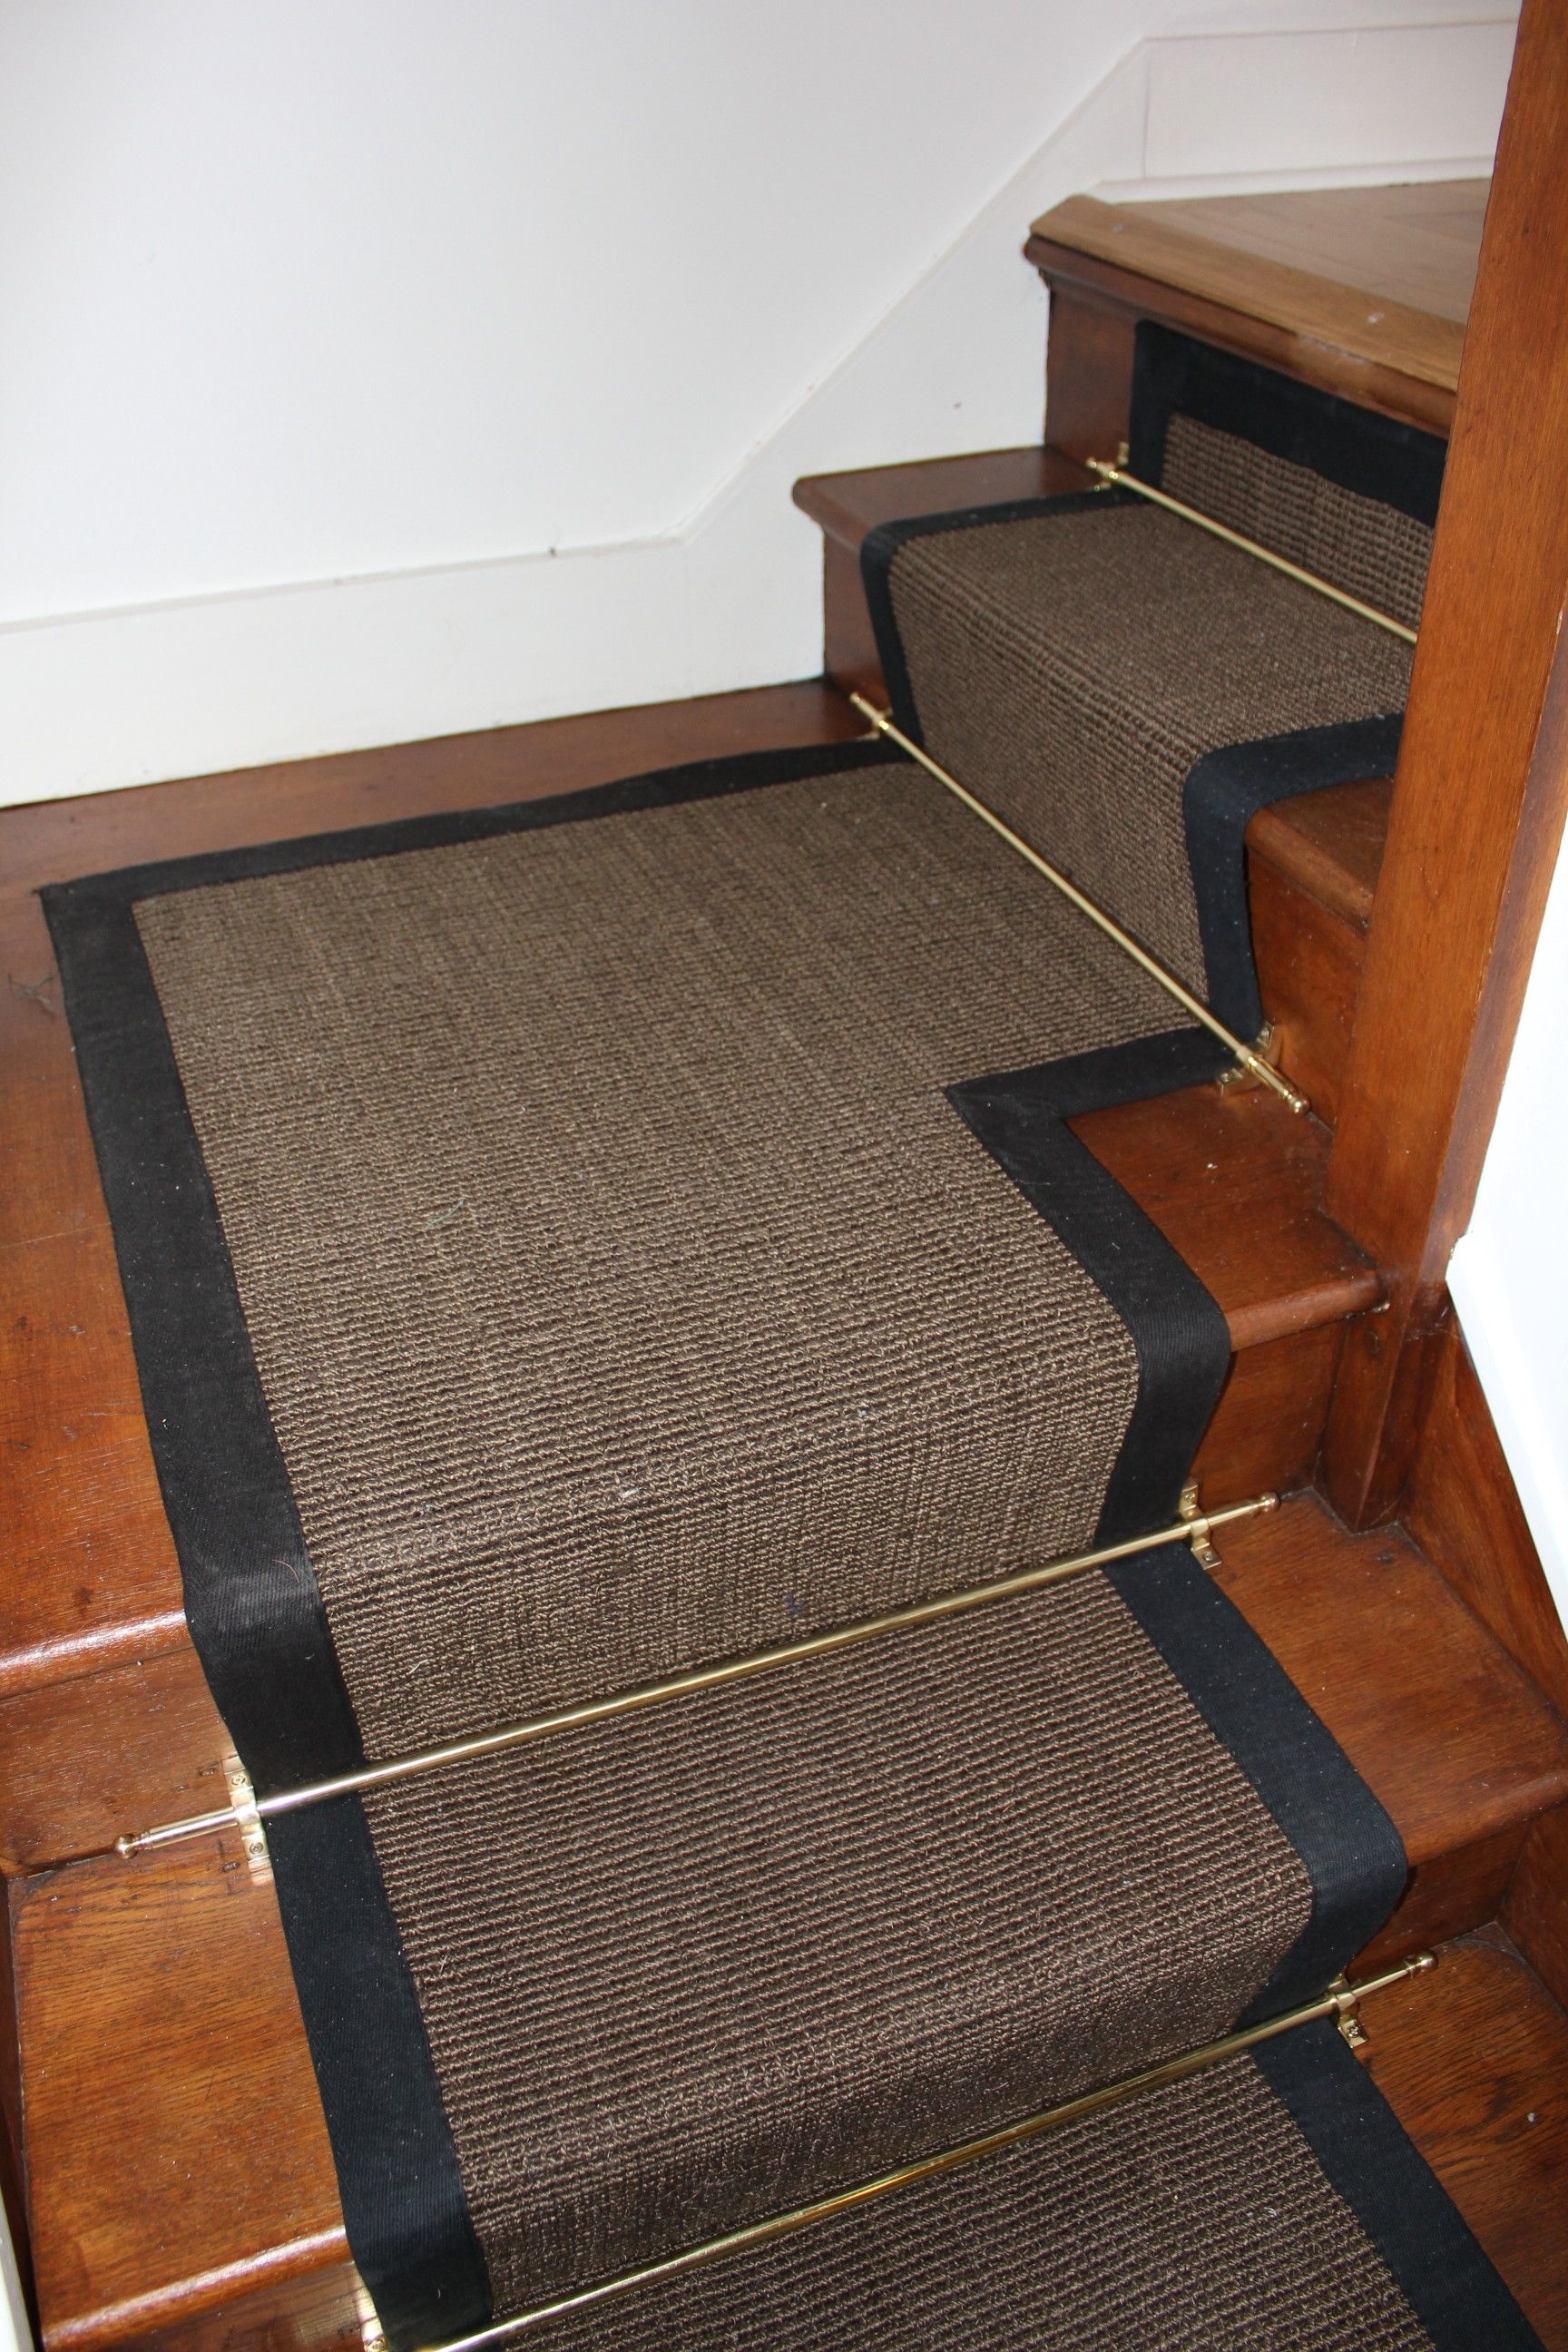 Runners For Stairs Pattern Set Staircases Racing With A Striped Intended For Carpets Runners For Stairs (View 5 of 20)